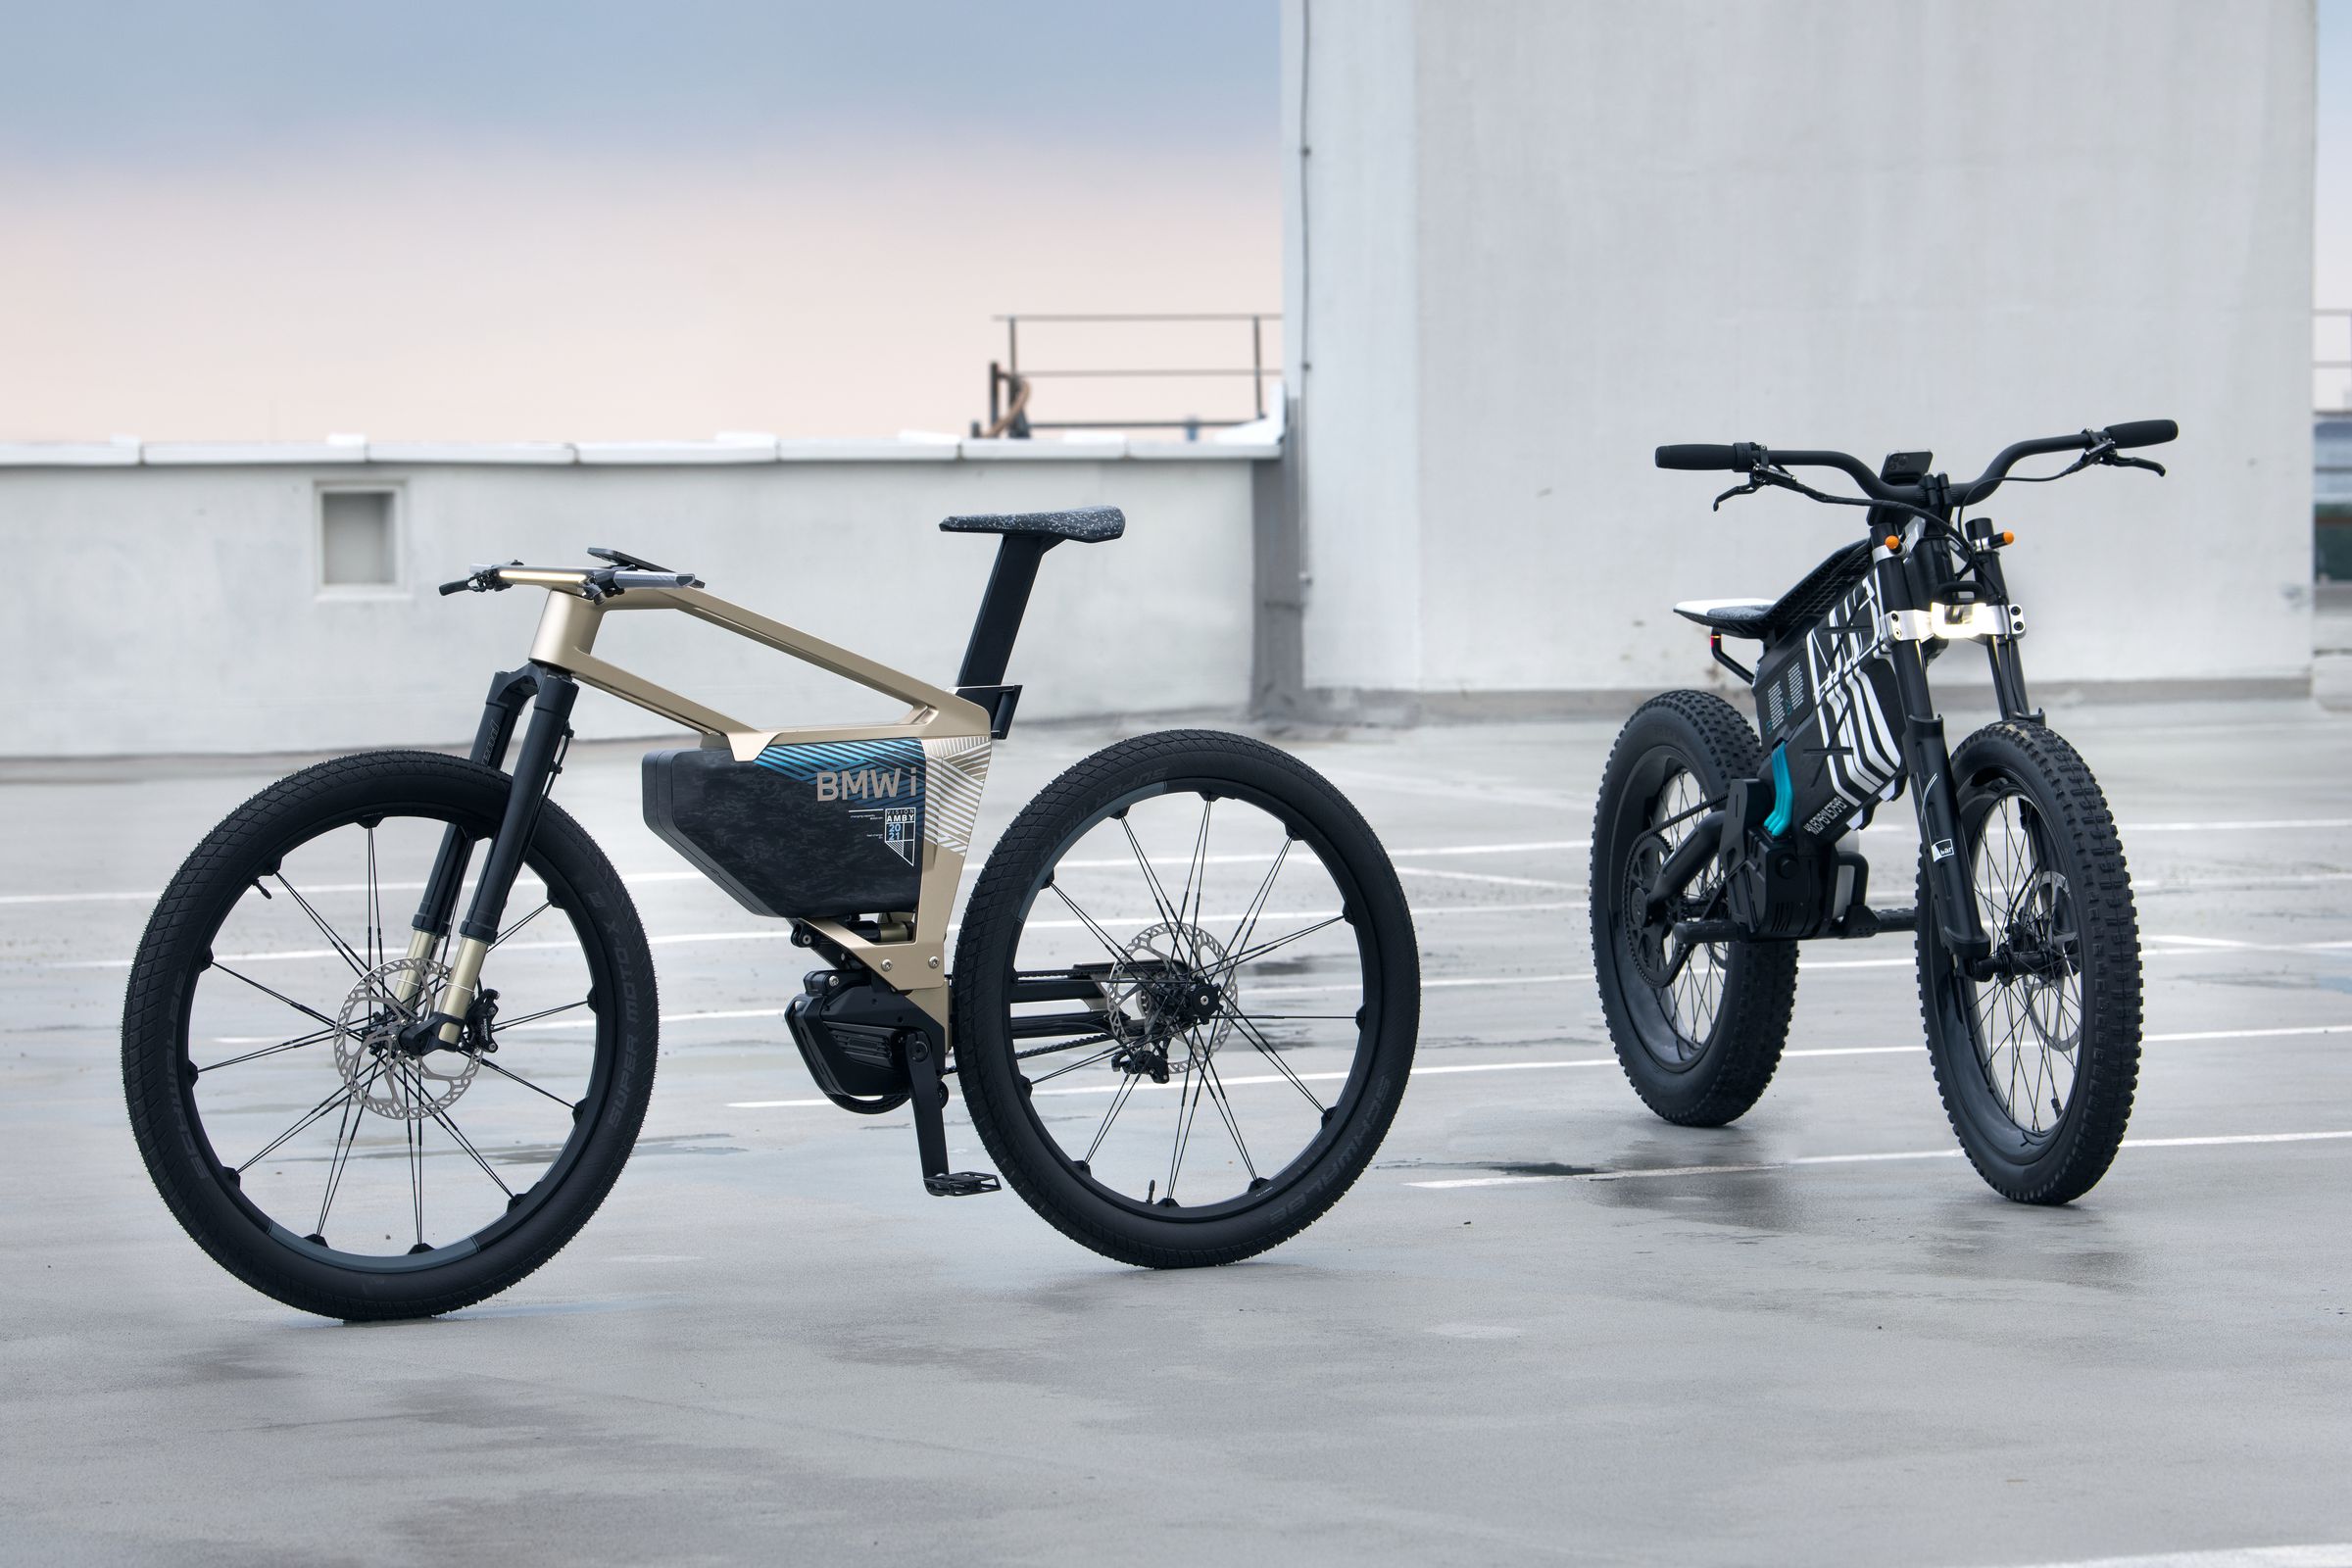 BMW’s two concept e-bikes envision geofencing to limit speeds inside cities.